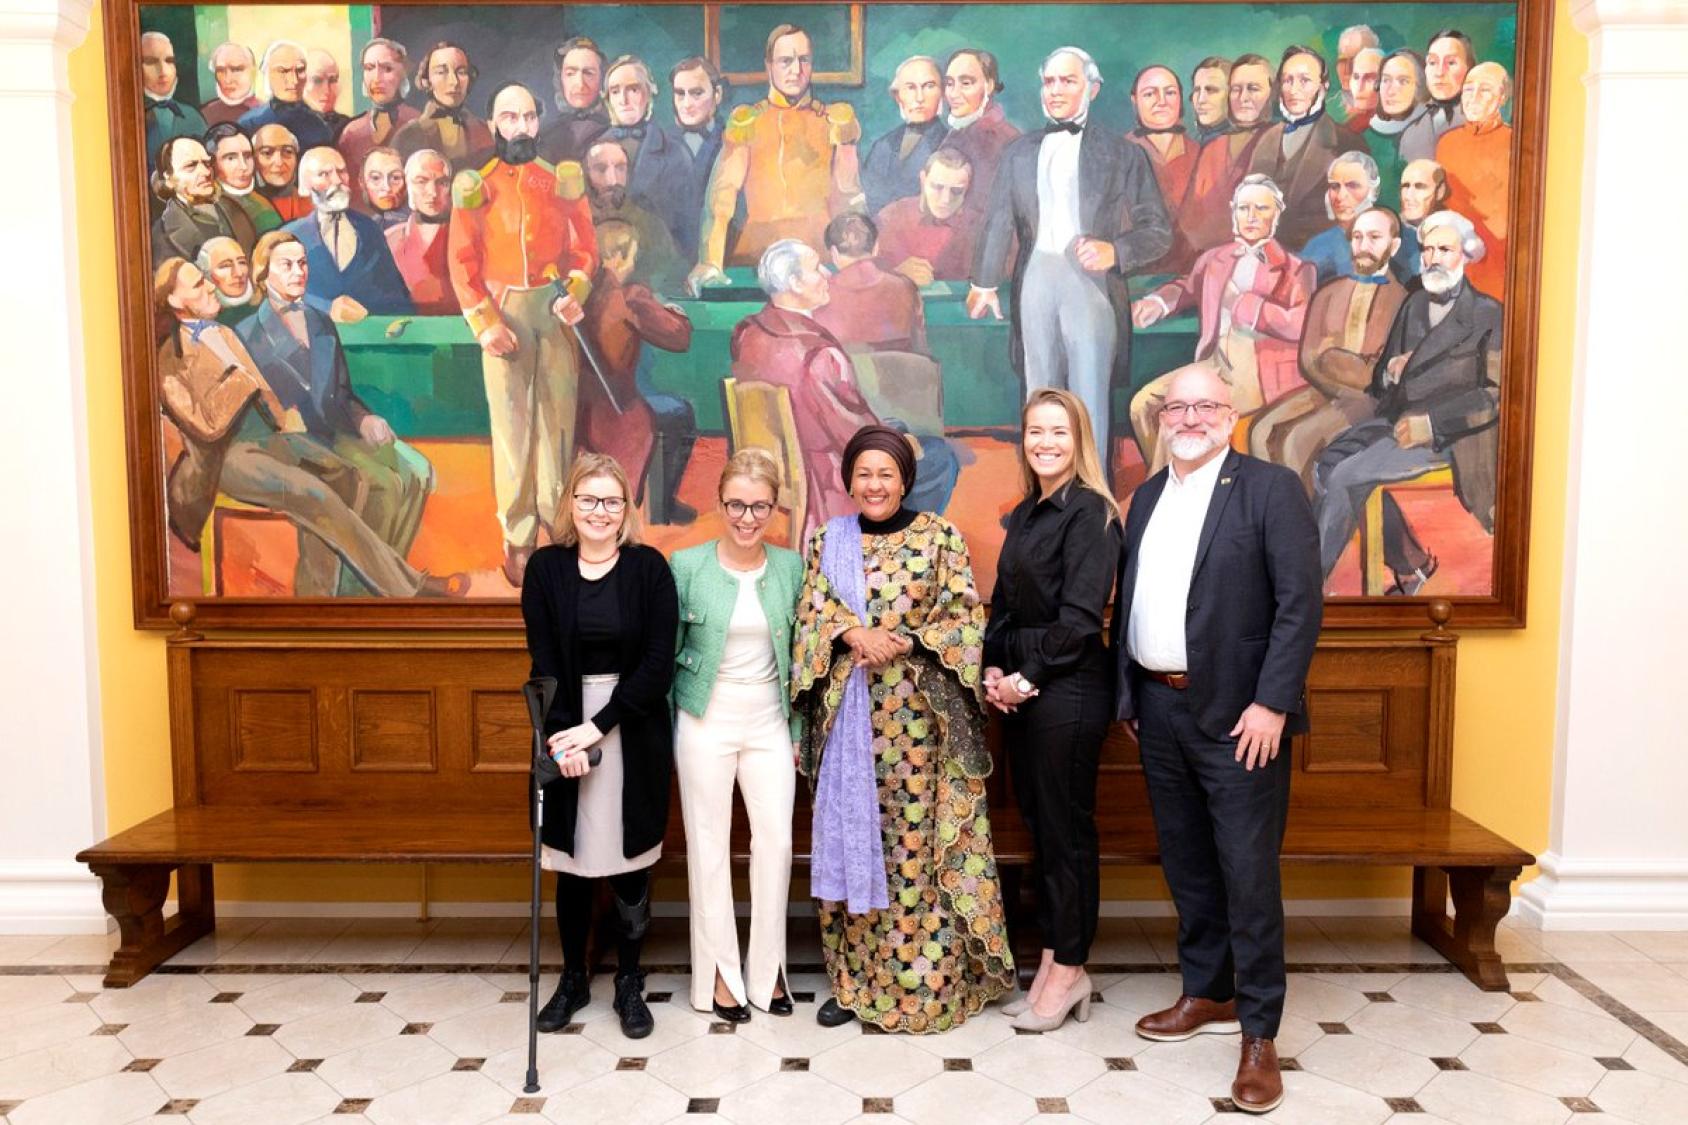 UN deputy chief stands with parliamentarians in Iceland, in front of a colorful bright painting.